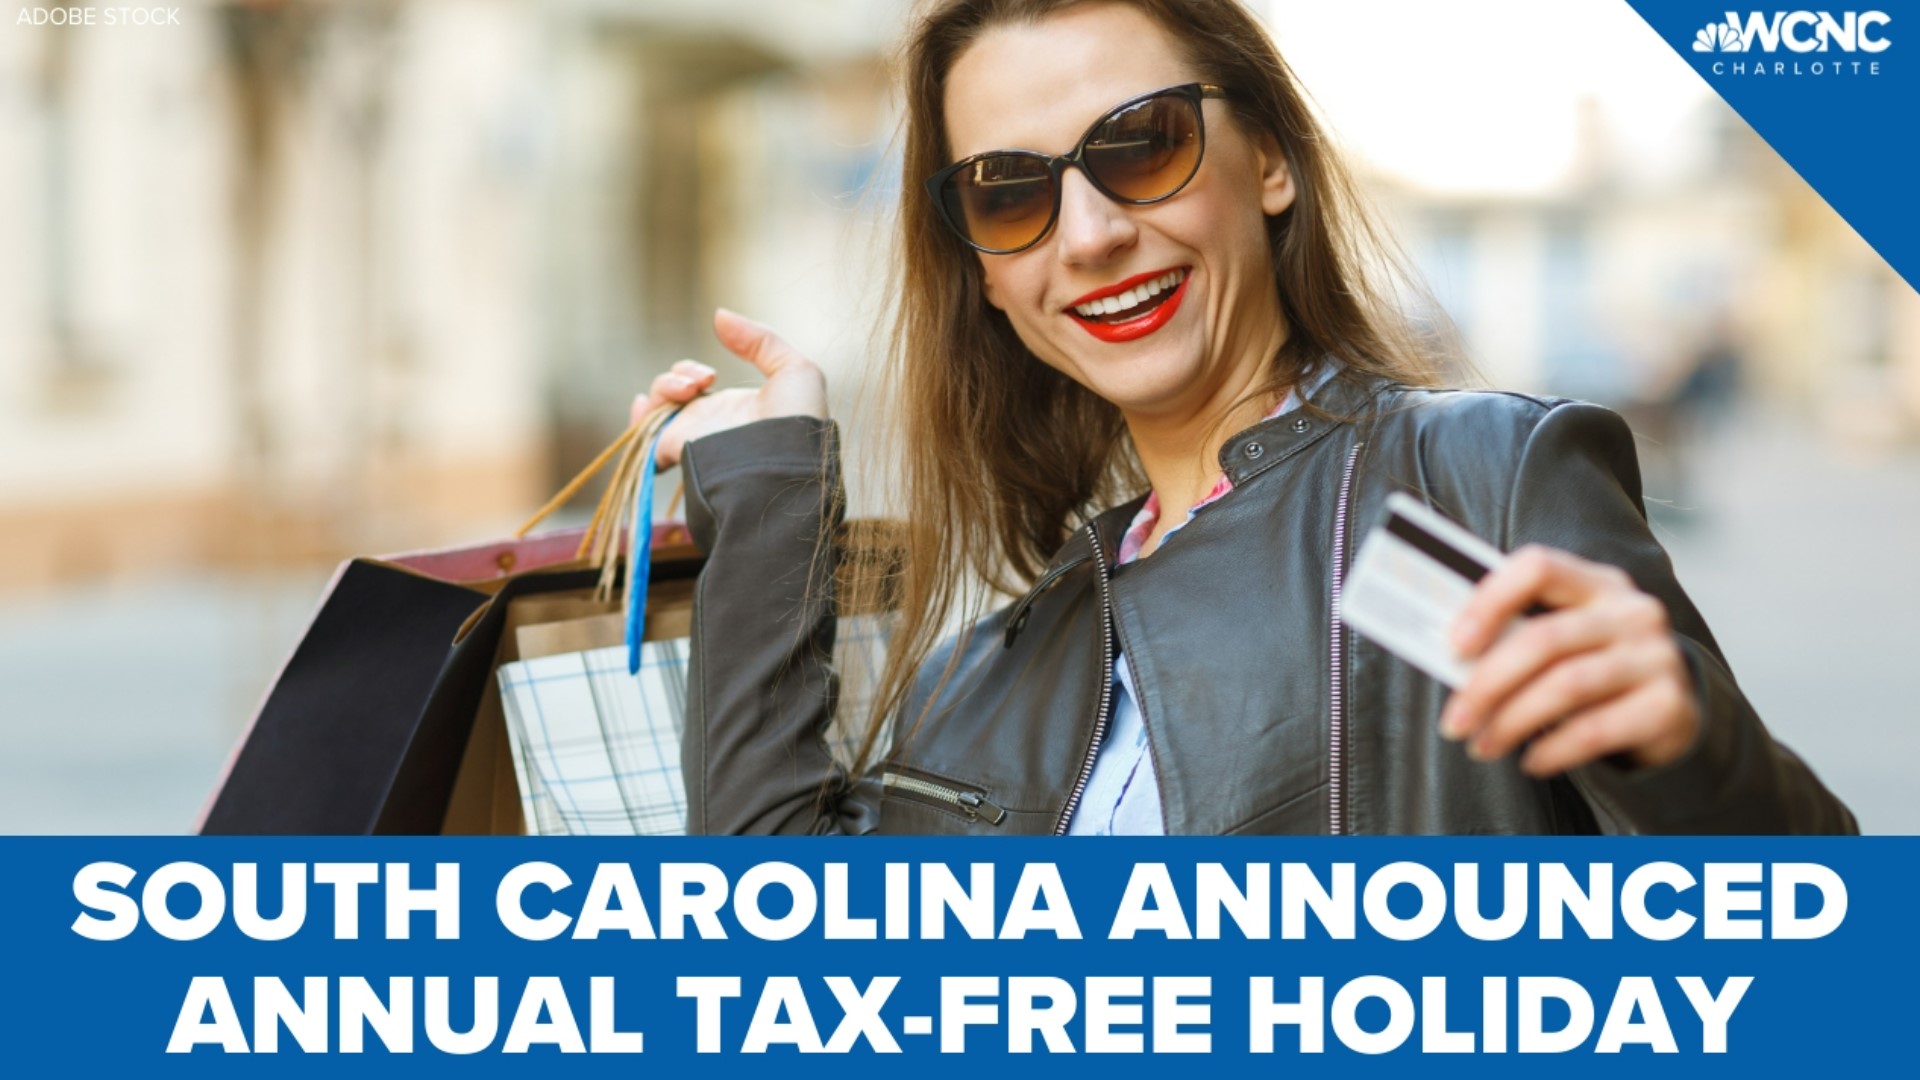 For 72 hours shoppers in the Palmetto State won't have to worry about paying the state's 6% sales tax on certain items.